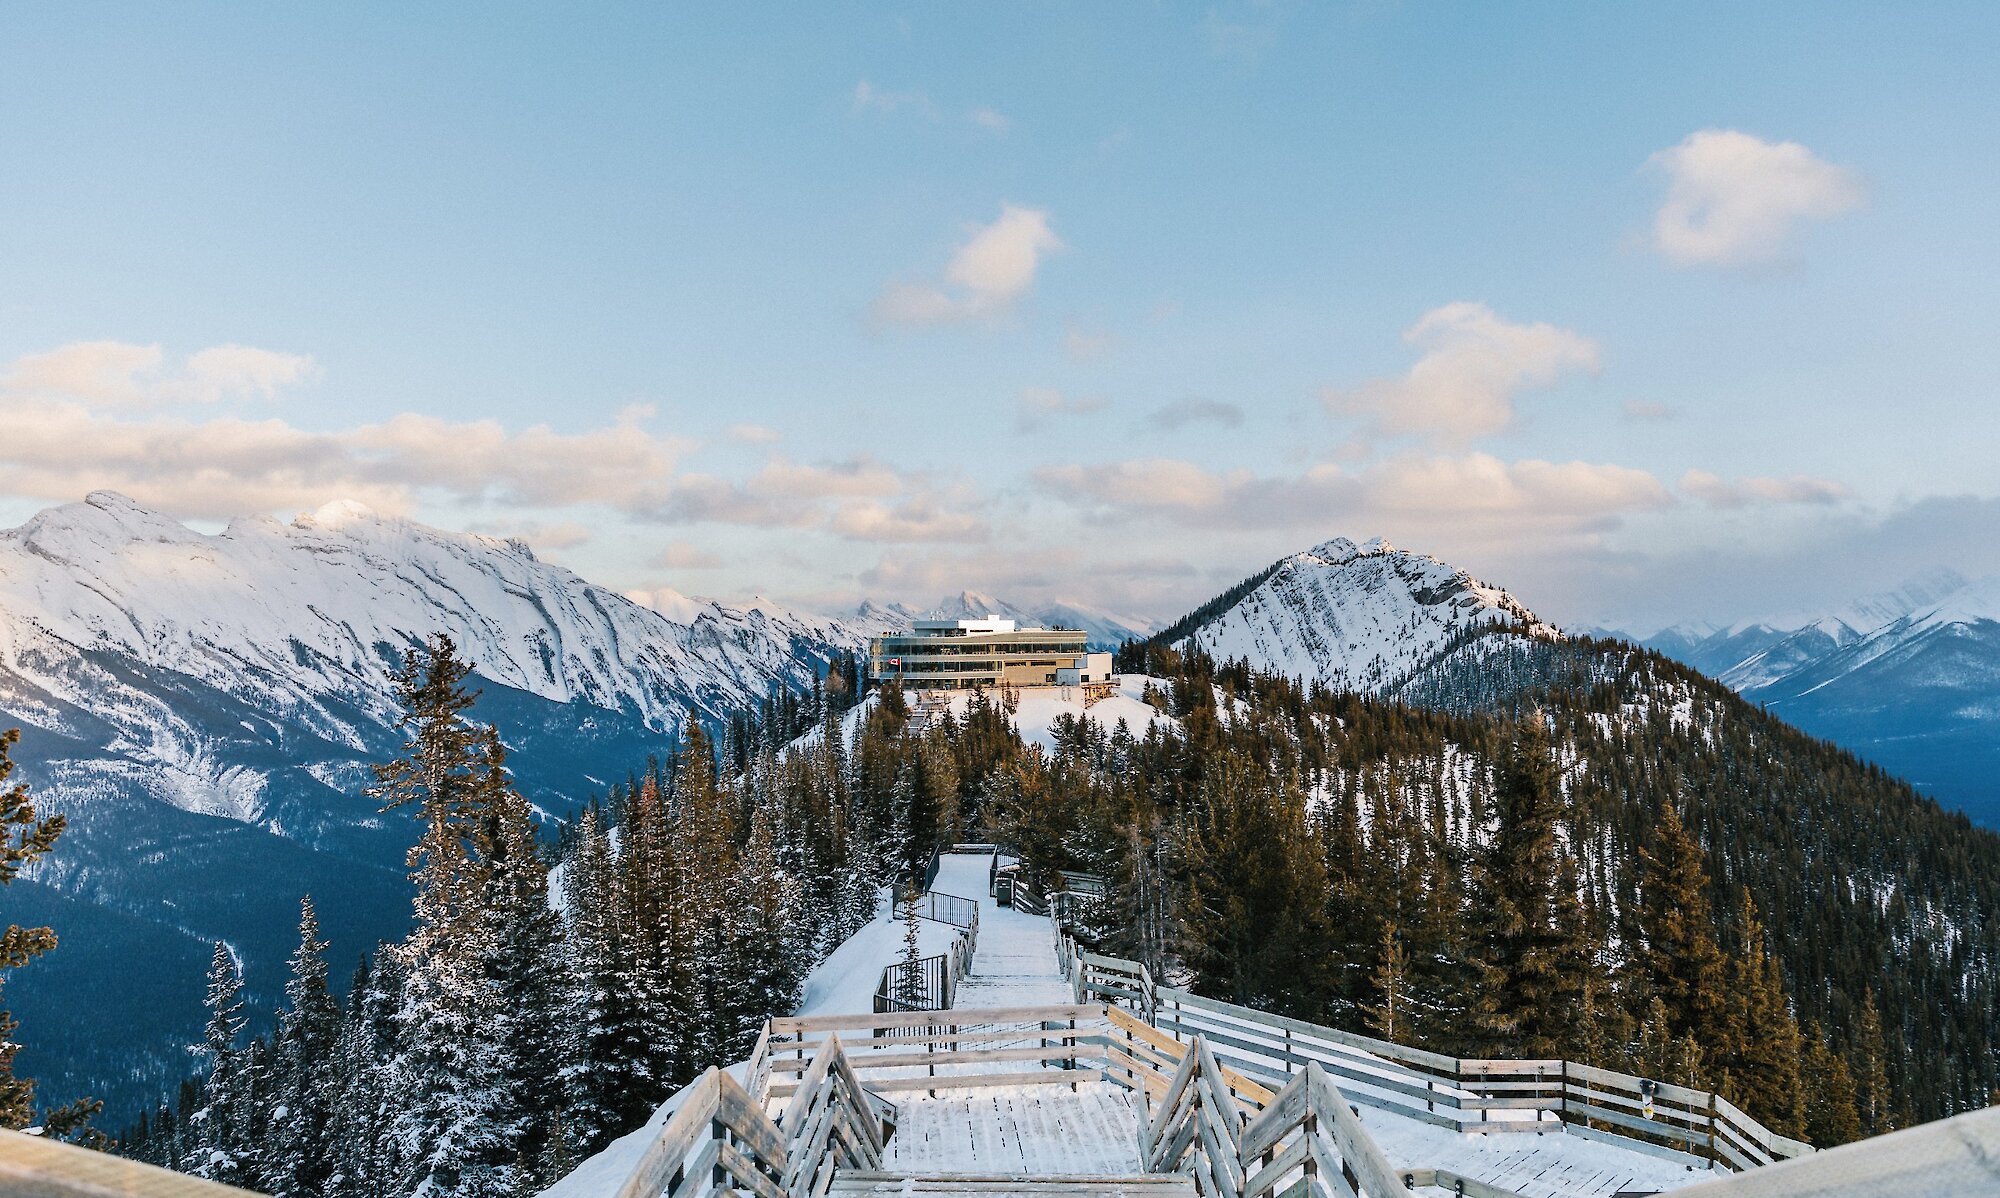 The boardwalk at the top of the Banff Gondola in winter